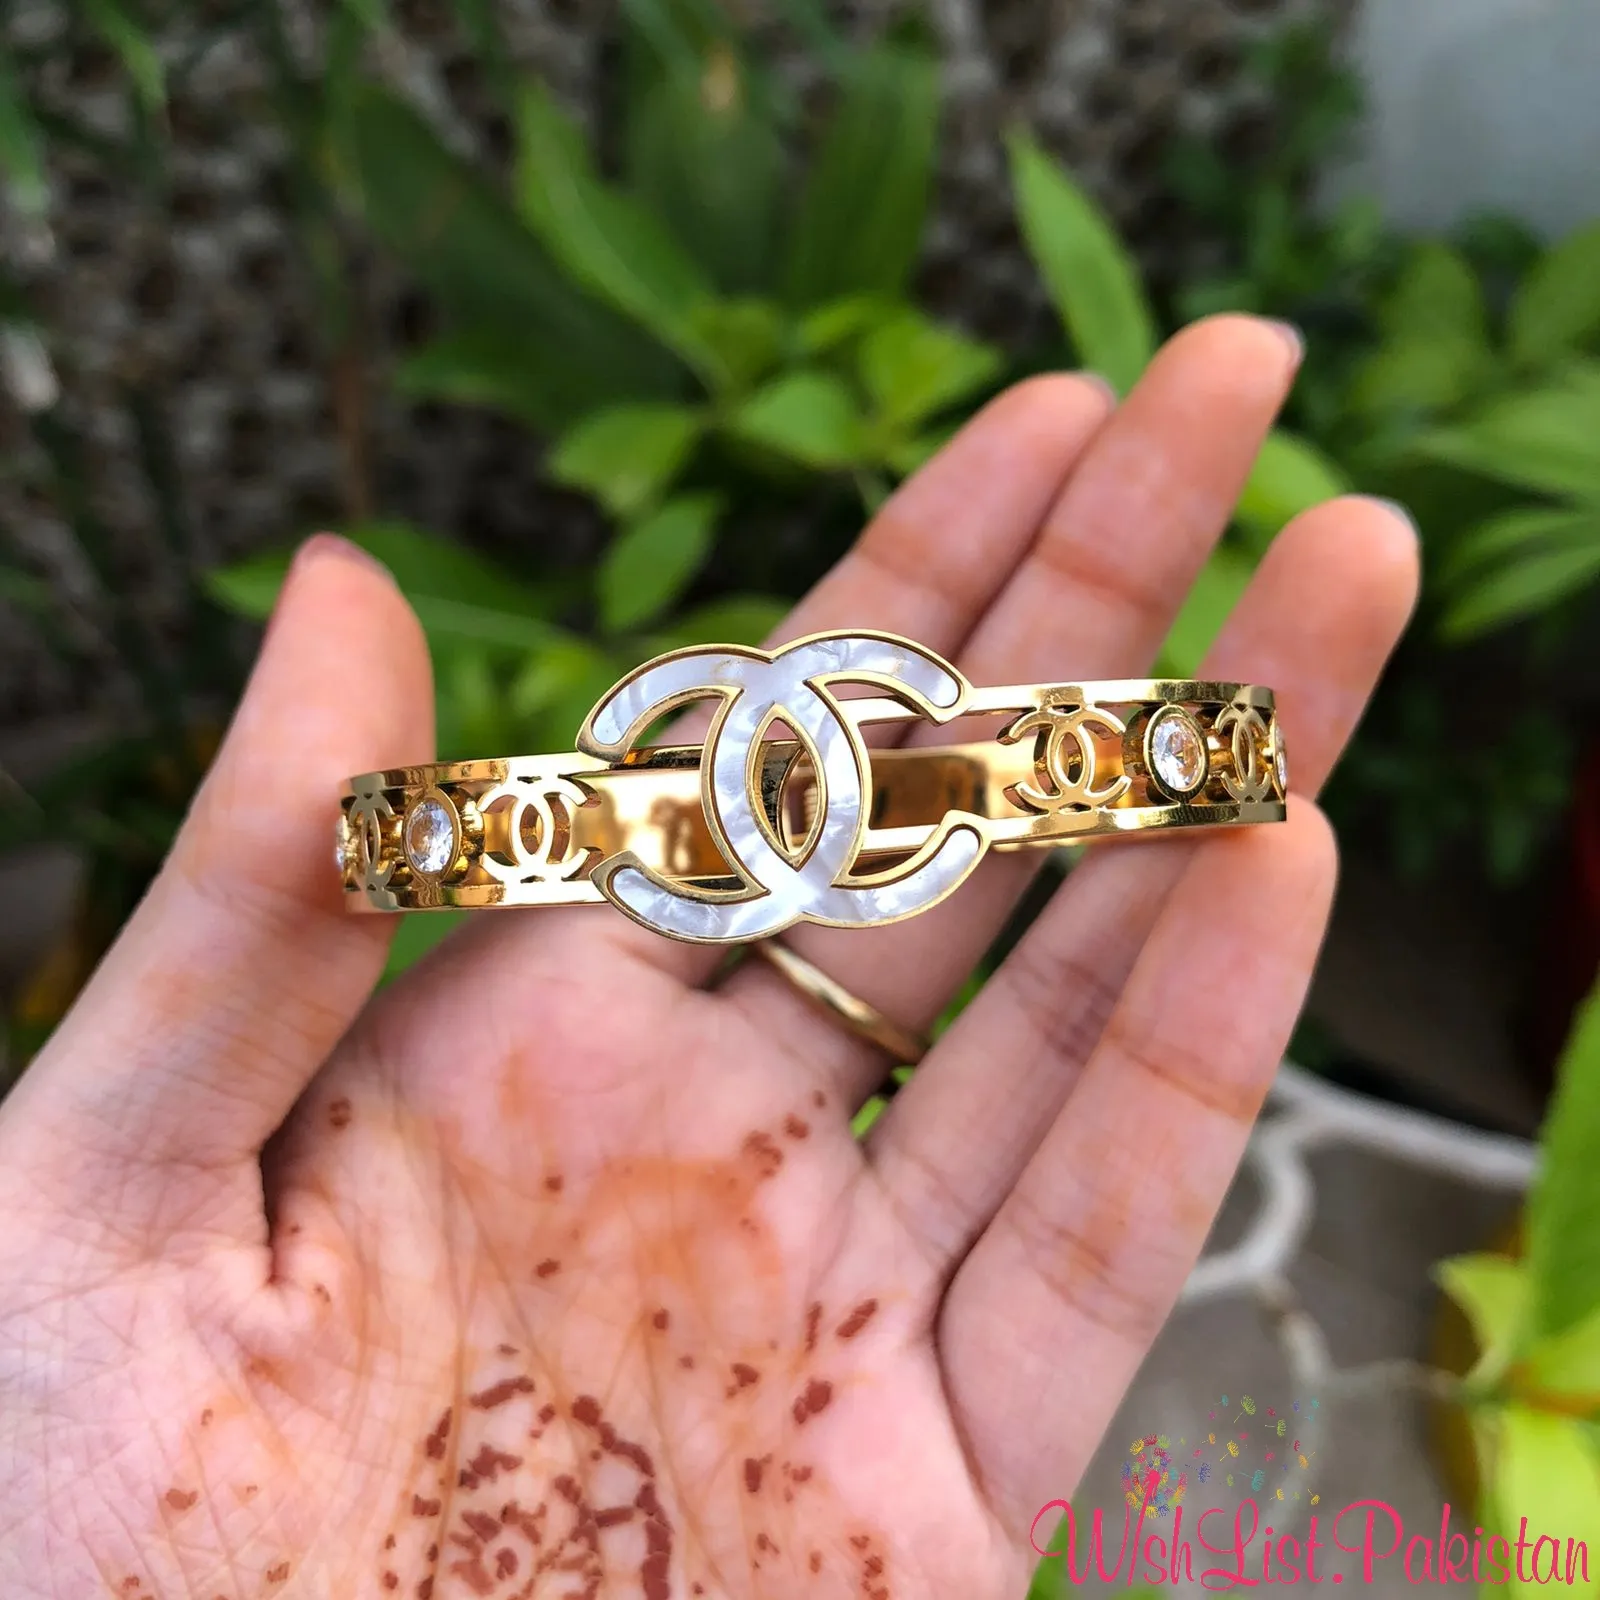 Chanel Bangle Best Price In Pakistan, Rs 1800